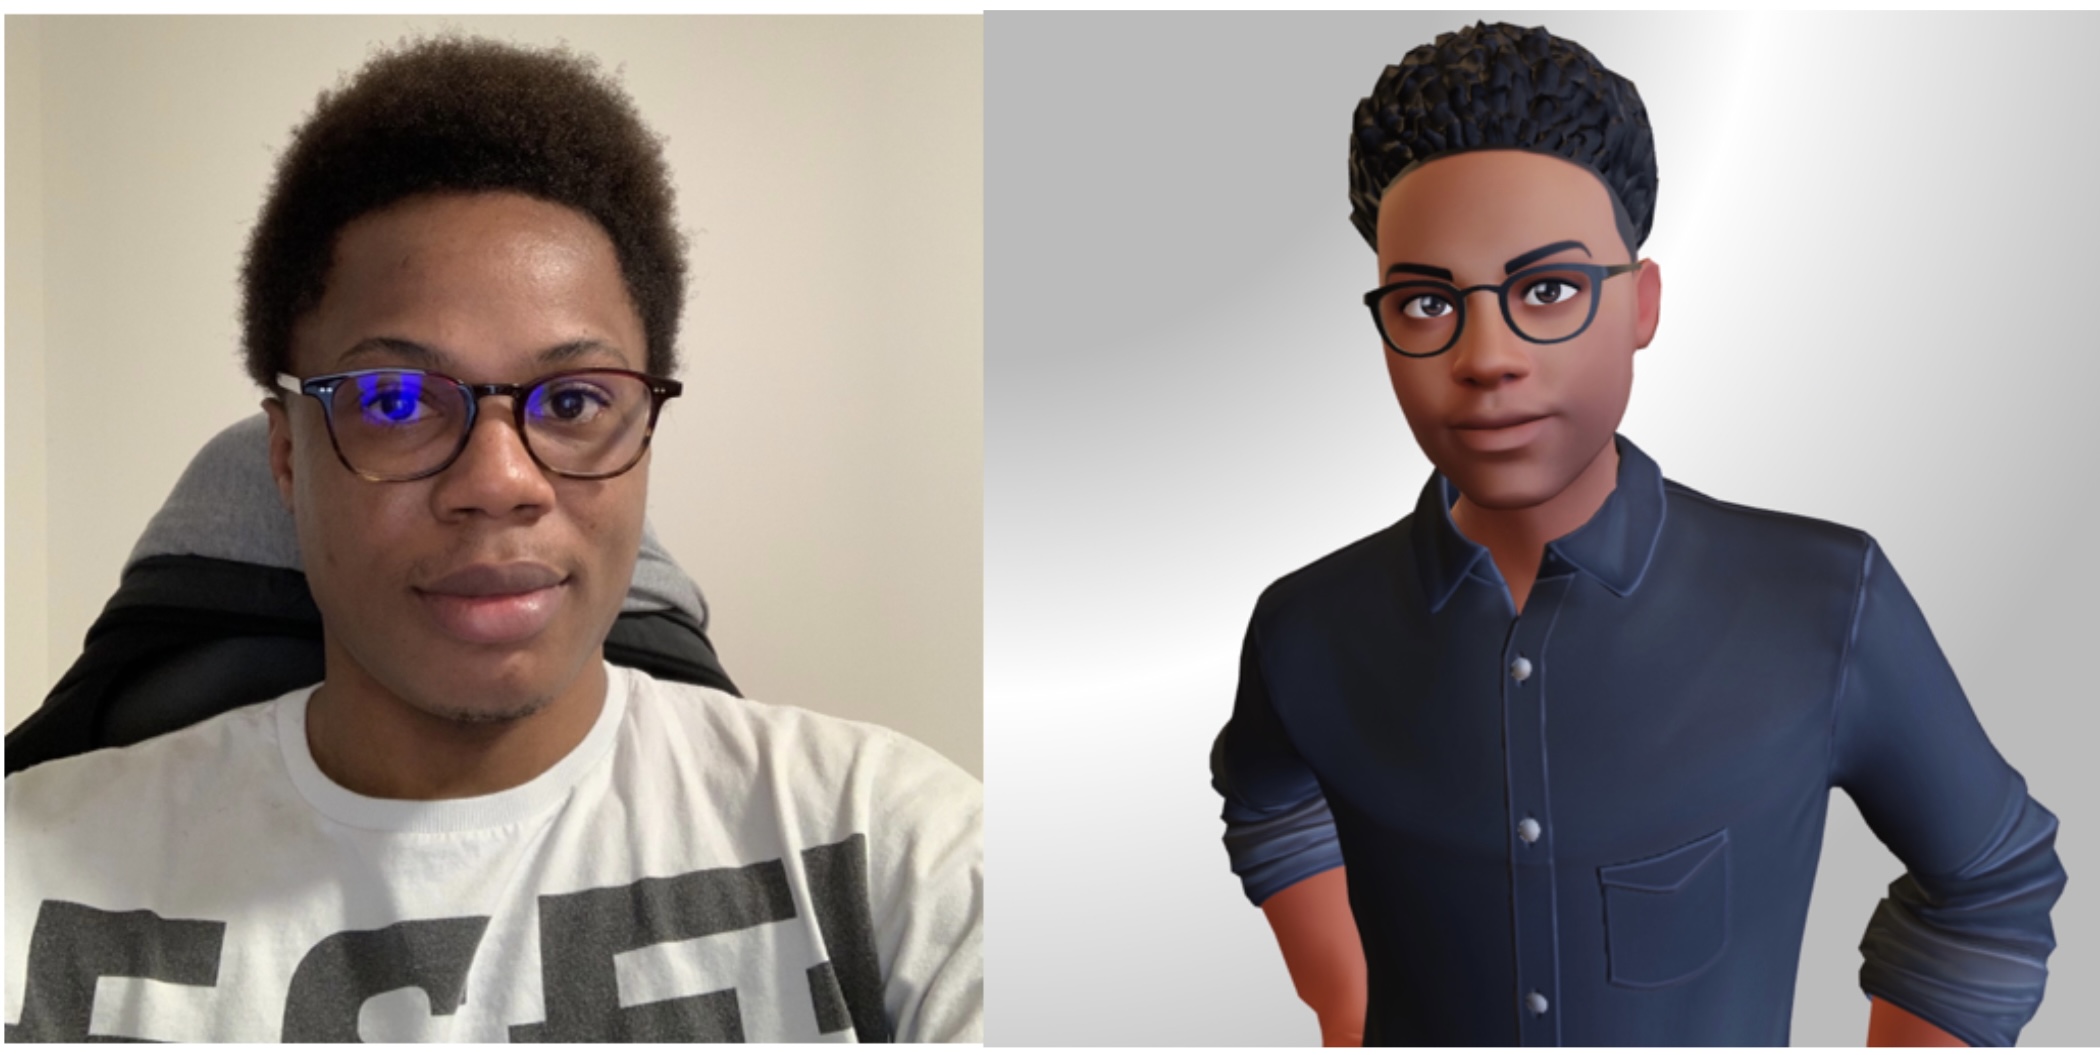 Turning self to virtual character 